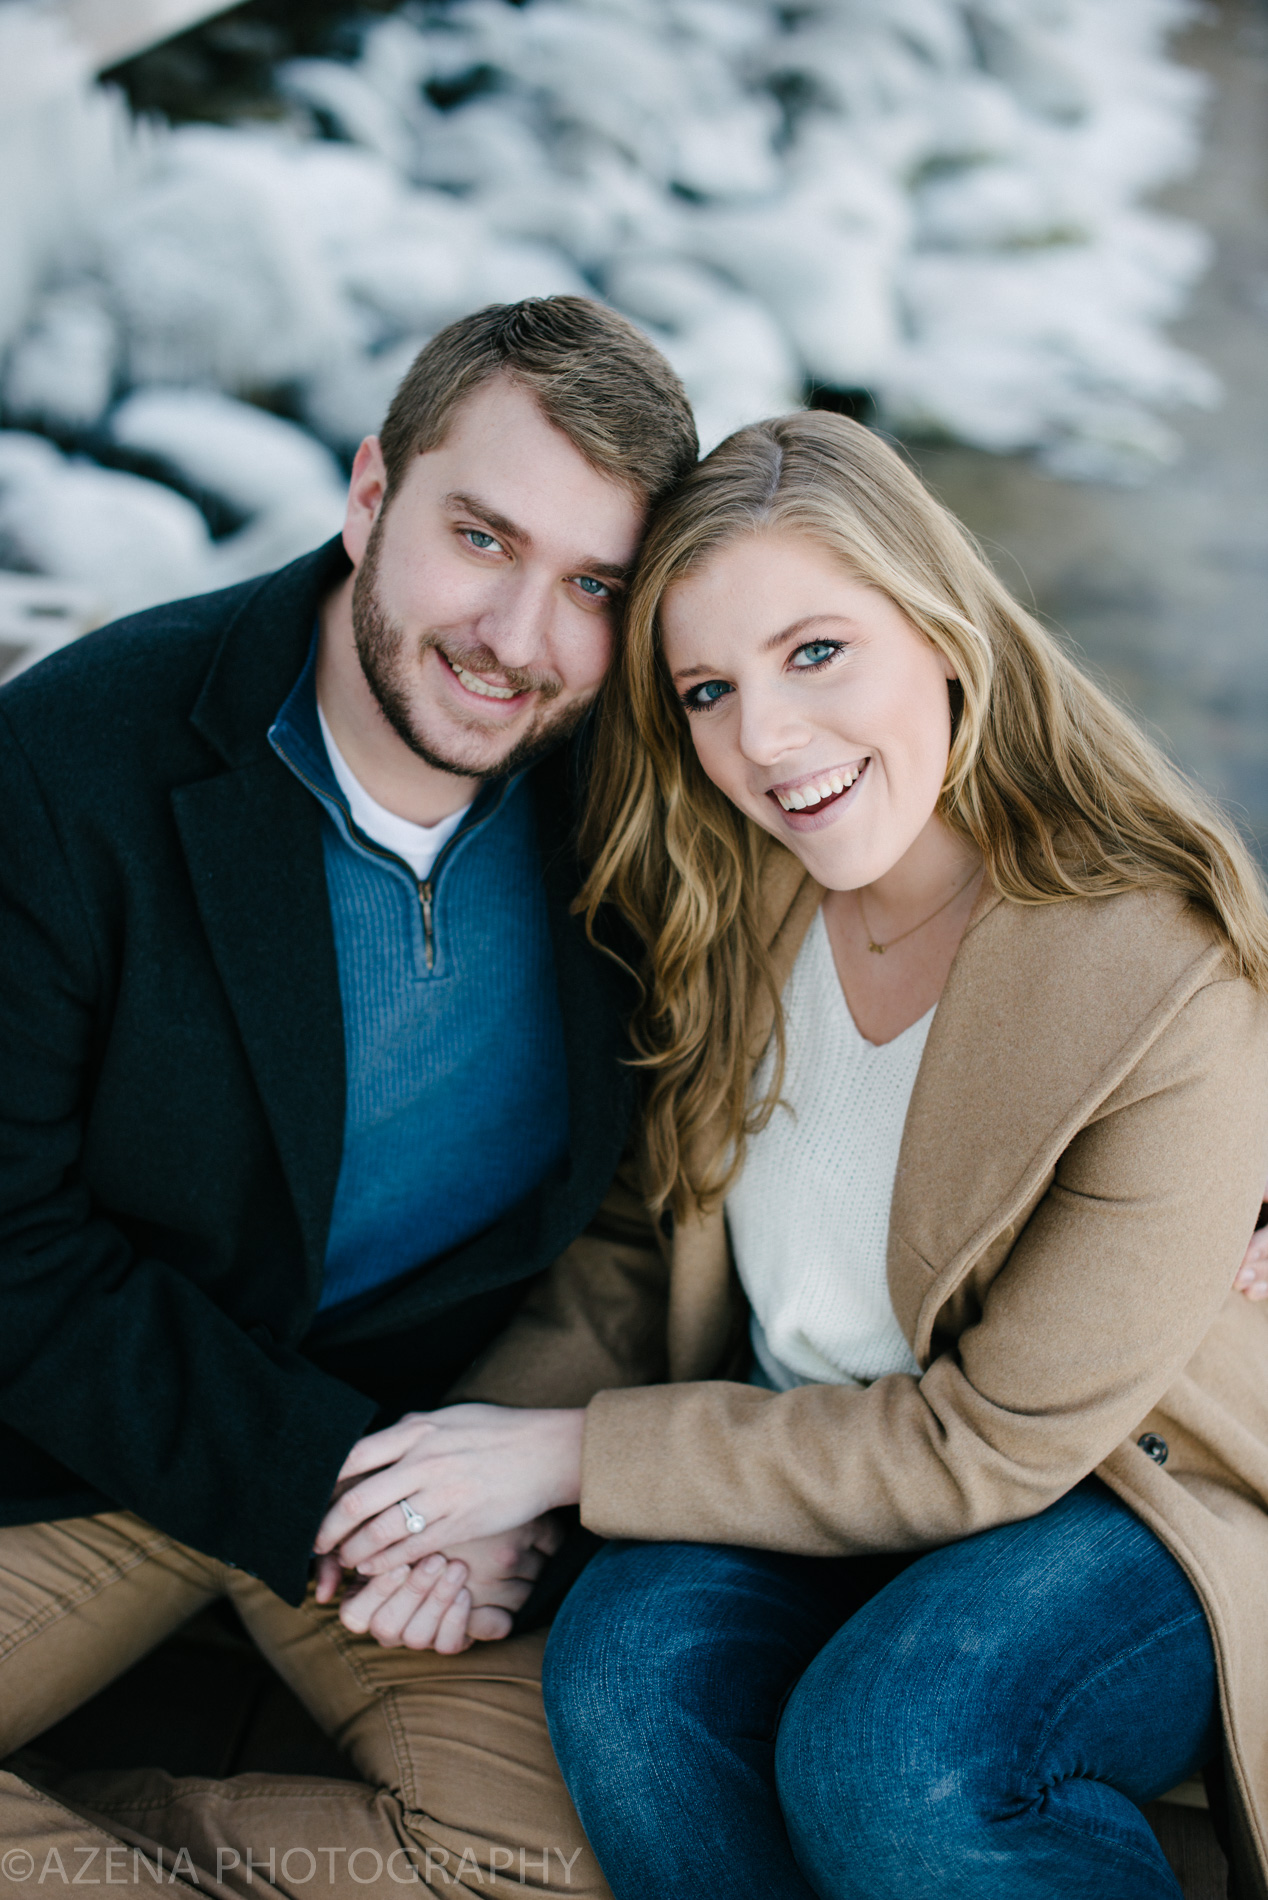 Winter engagement session at the Edgewater on the lake